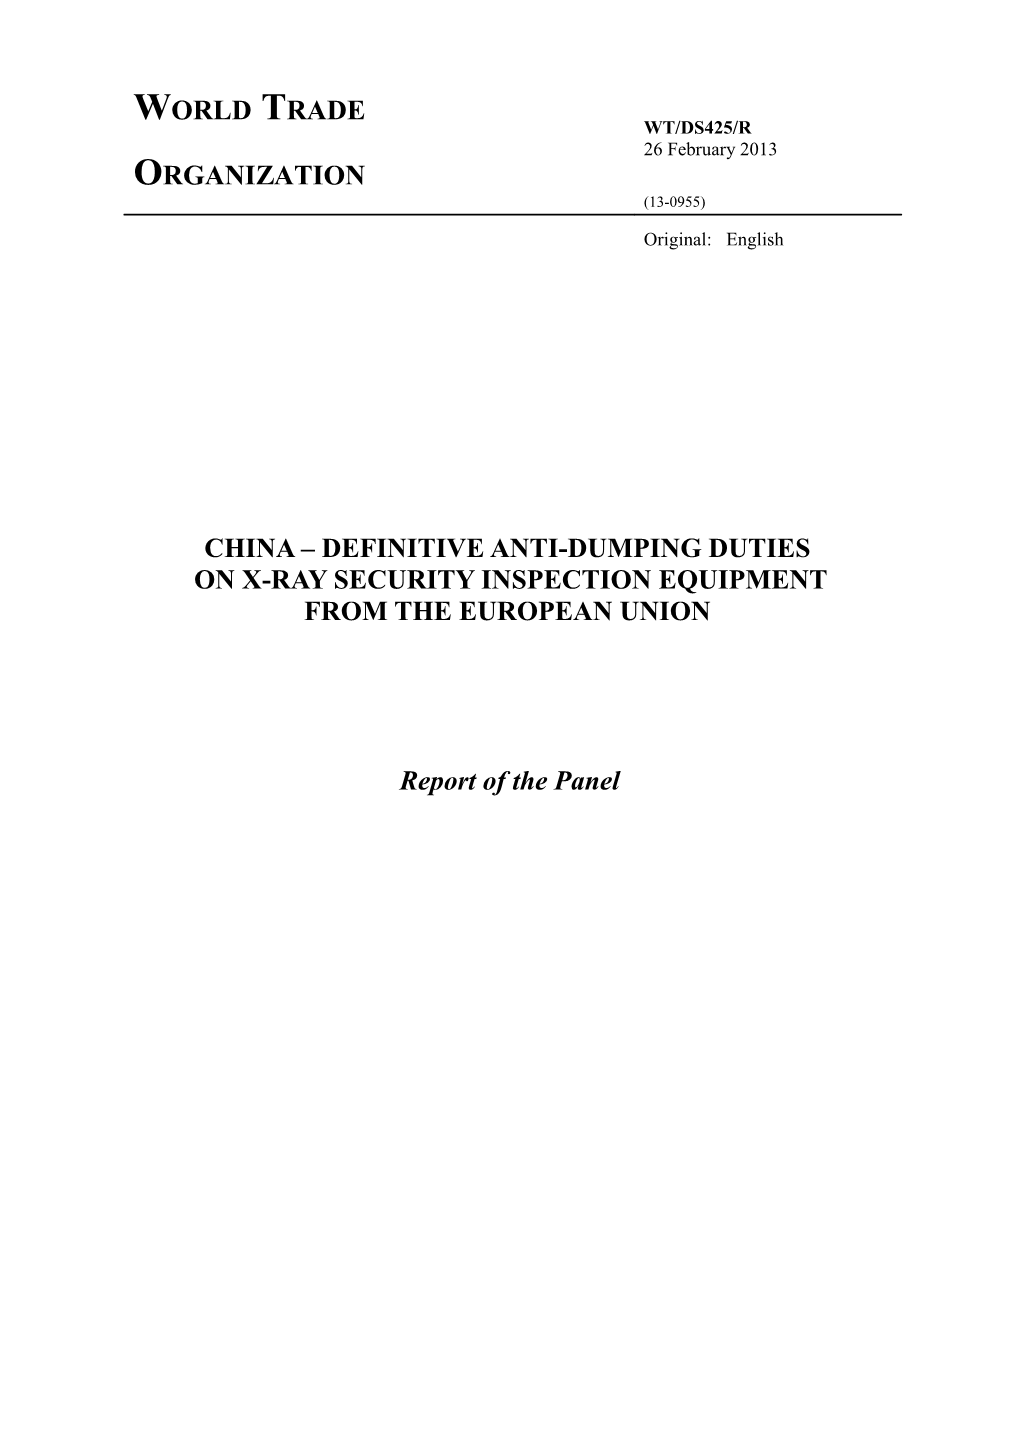 United States Anti-Dumping Administrative Reviews and Other